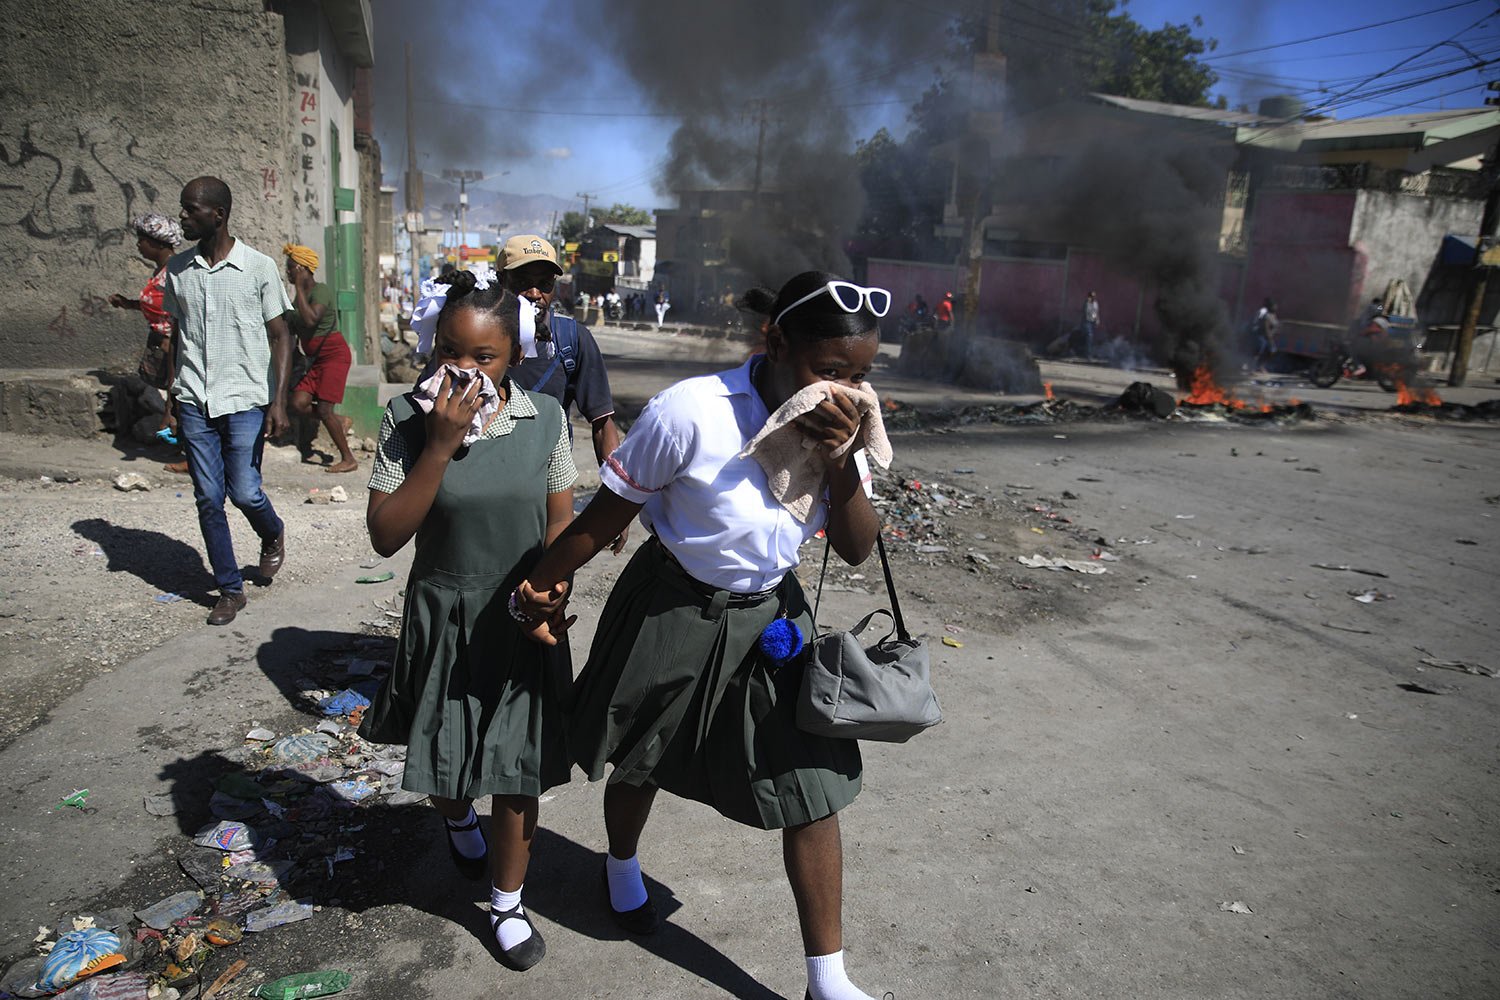  Students walk past a burning roadblock that was set up by  police protesting bad police governance in Port-au-Prince, Haiti, Jan. 26, 2023. (AP Photo/Odelyn Joseph) 